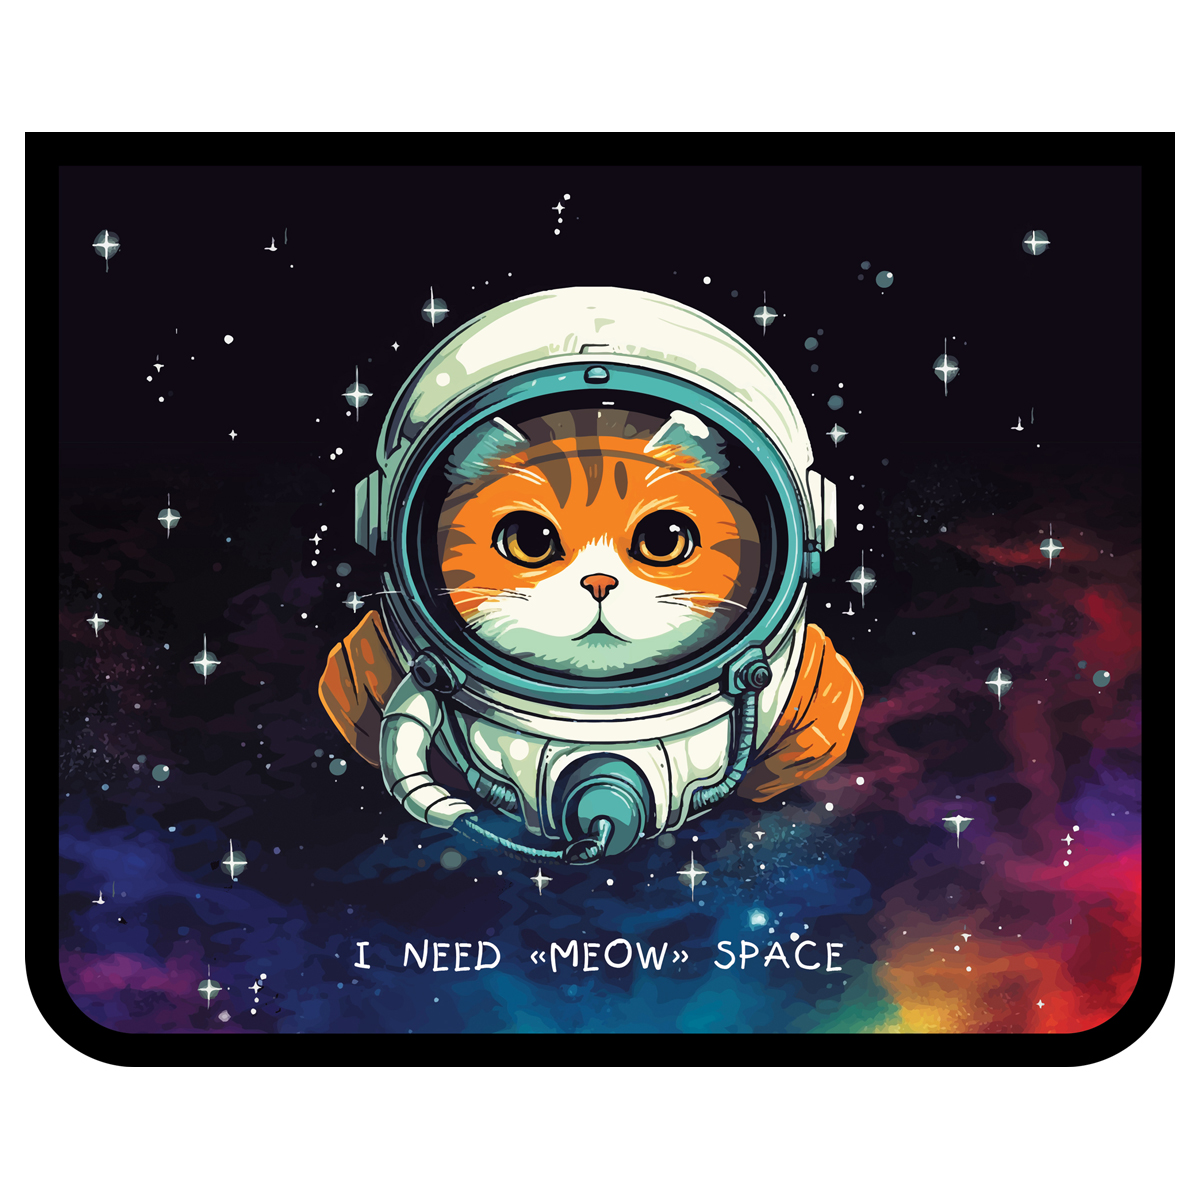    1 , 5, ArtSpace "Meow Space", ,   